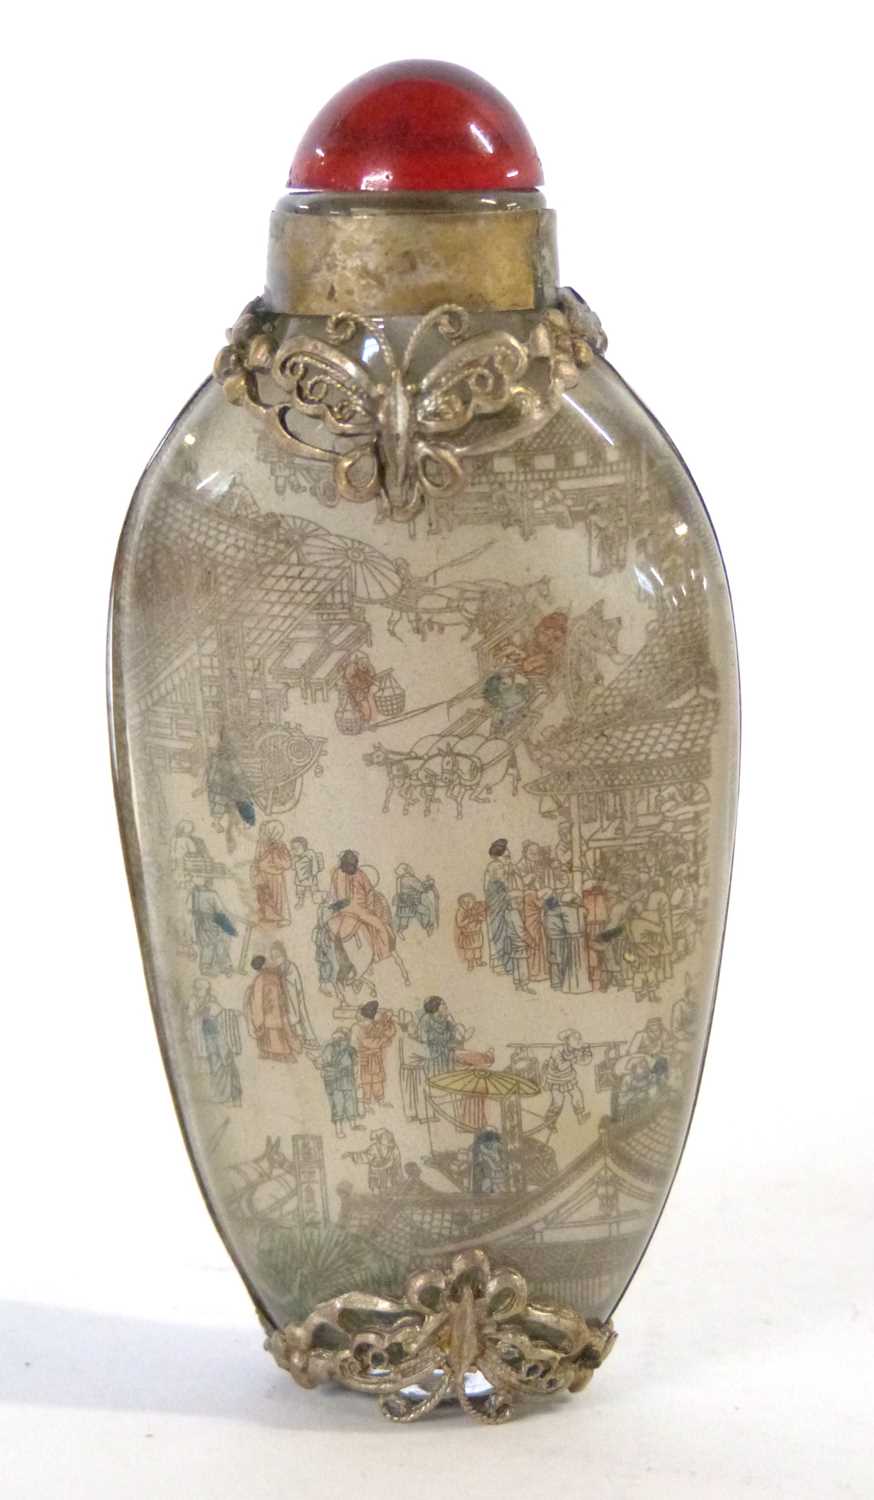 Antique Chinese reverse-painted snuff bottle with hardstone stopper and decorated with intricate - Image 5 of 8